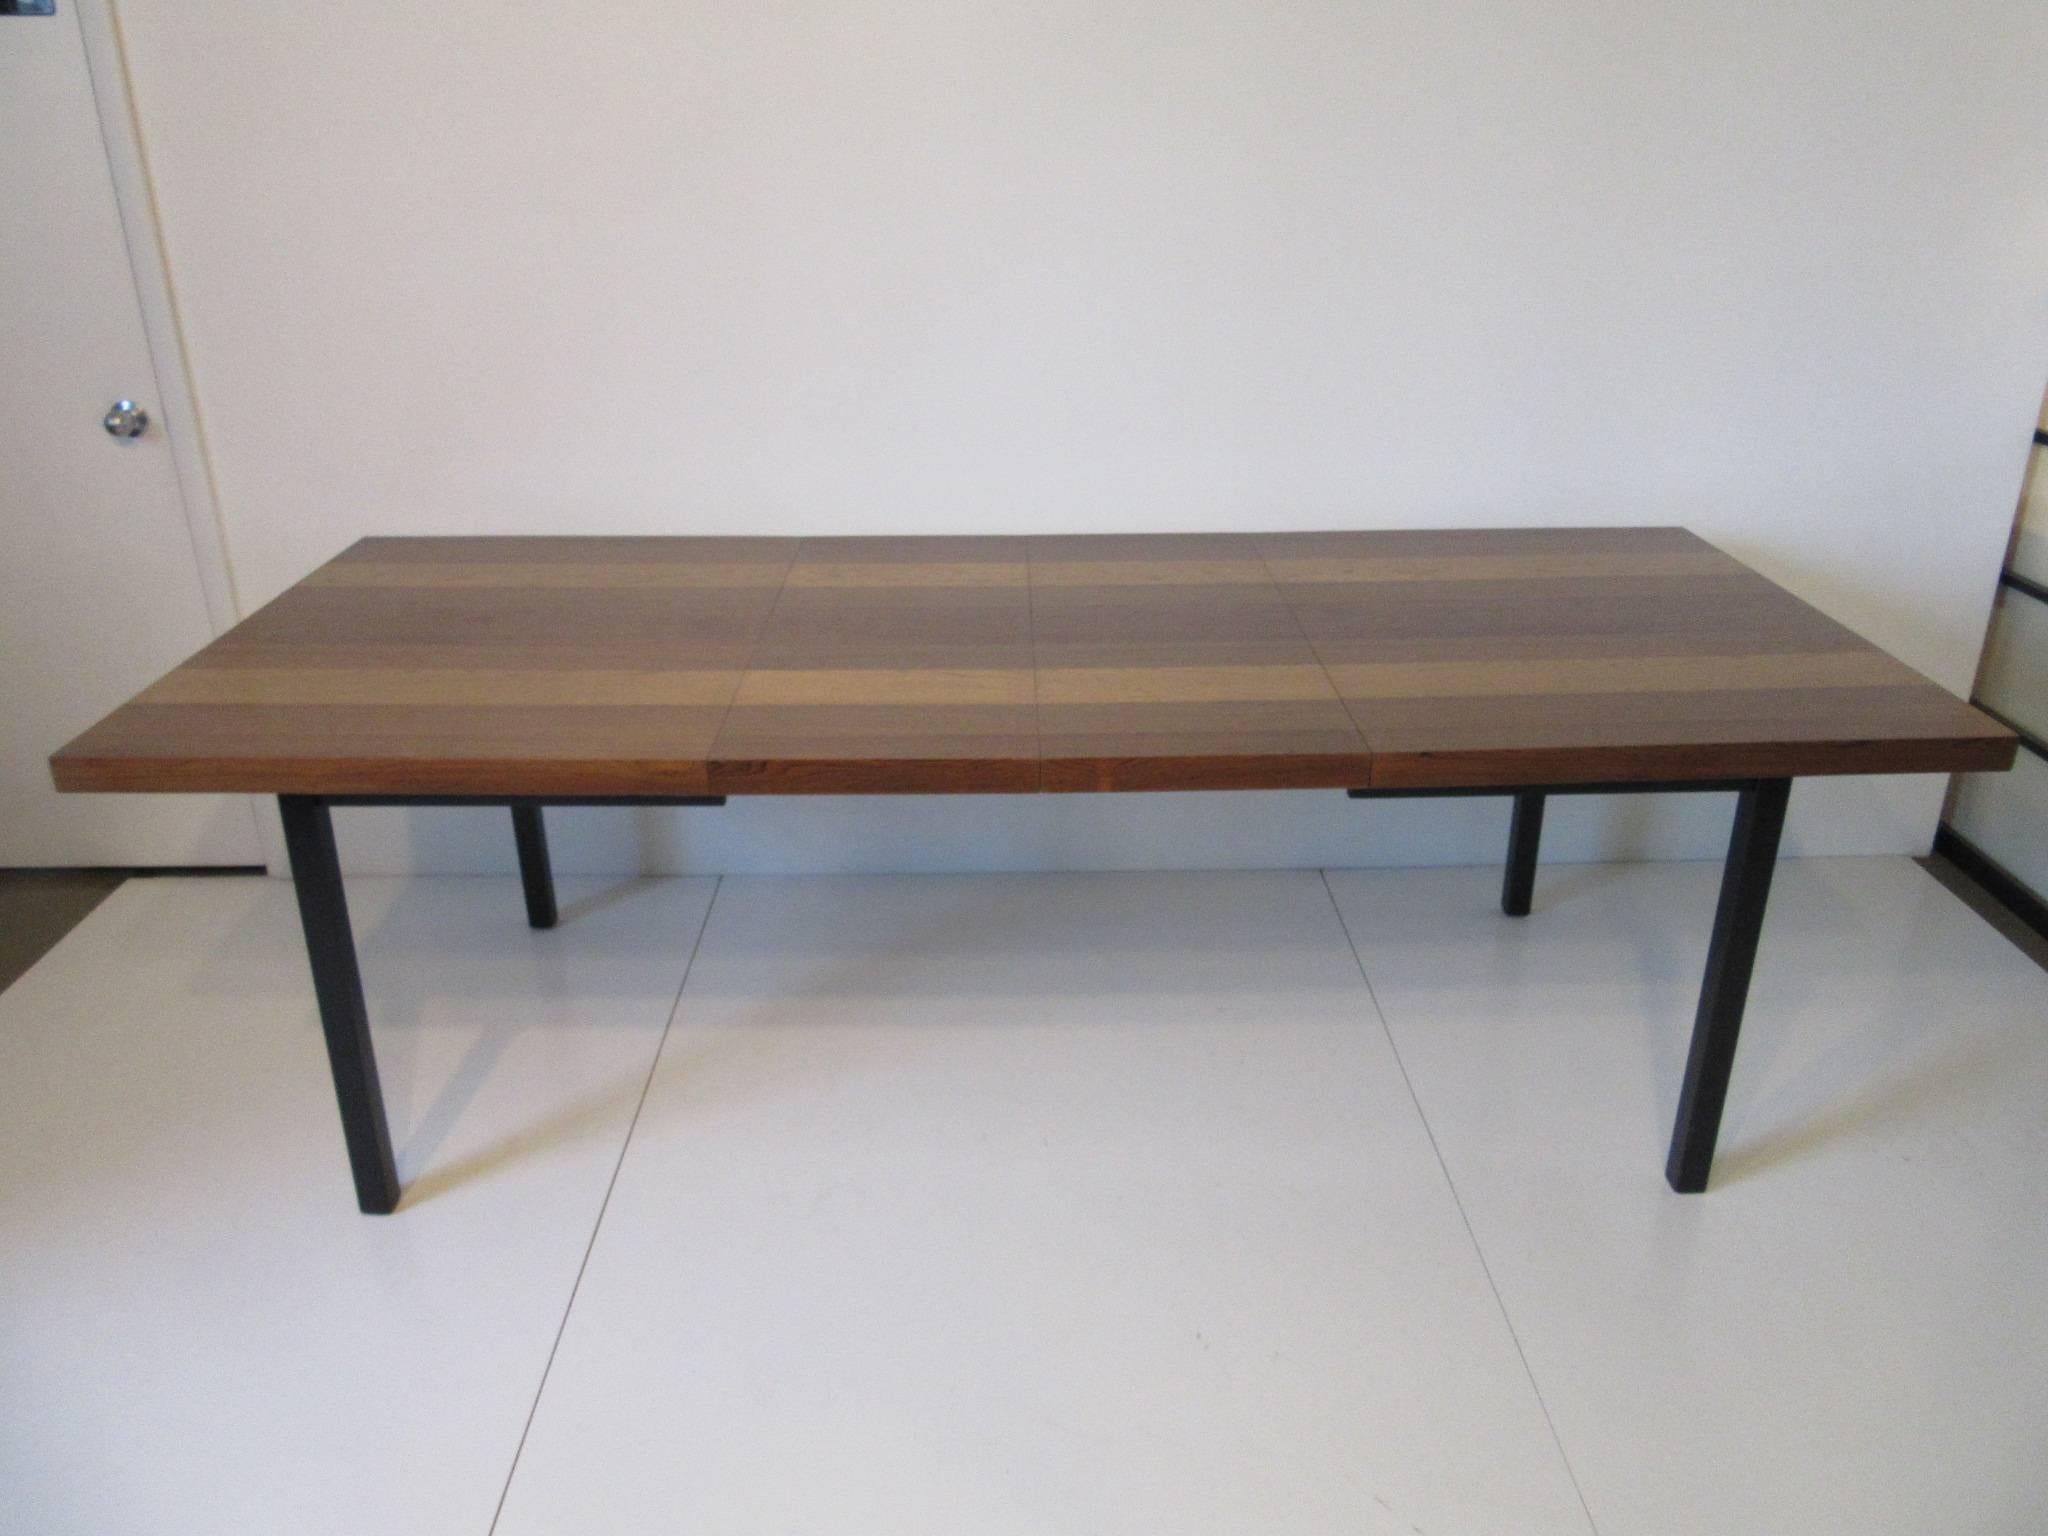 A multi wood plank dining table using walnut , rosewood and ash to create a lux rich feel, satin black legs makes the table top seemly float . Includes two 15.50